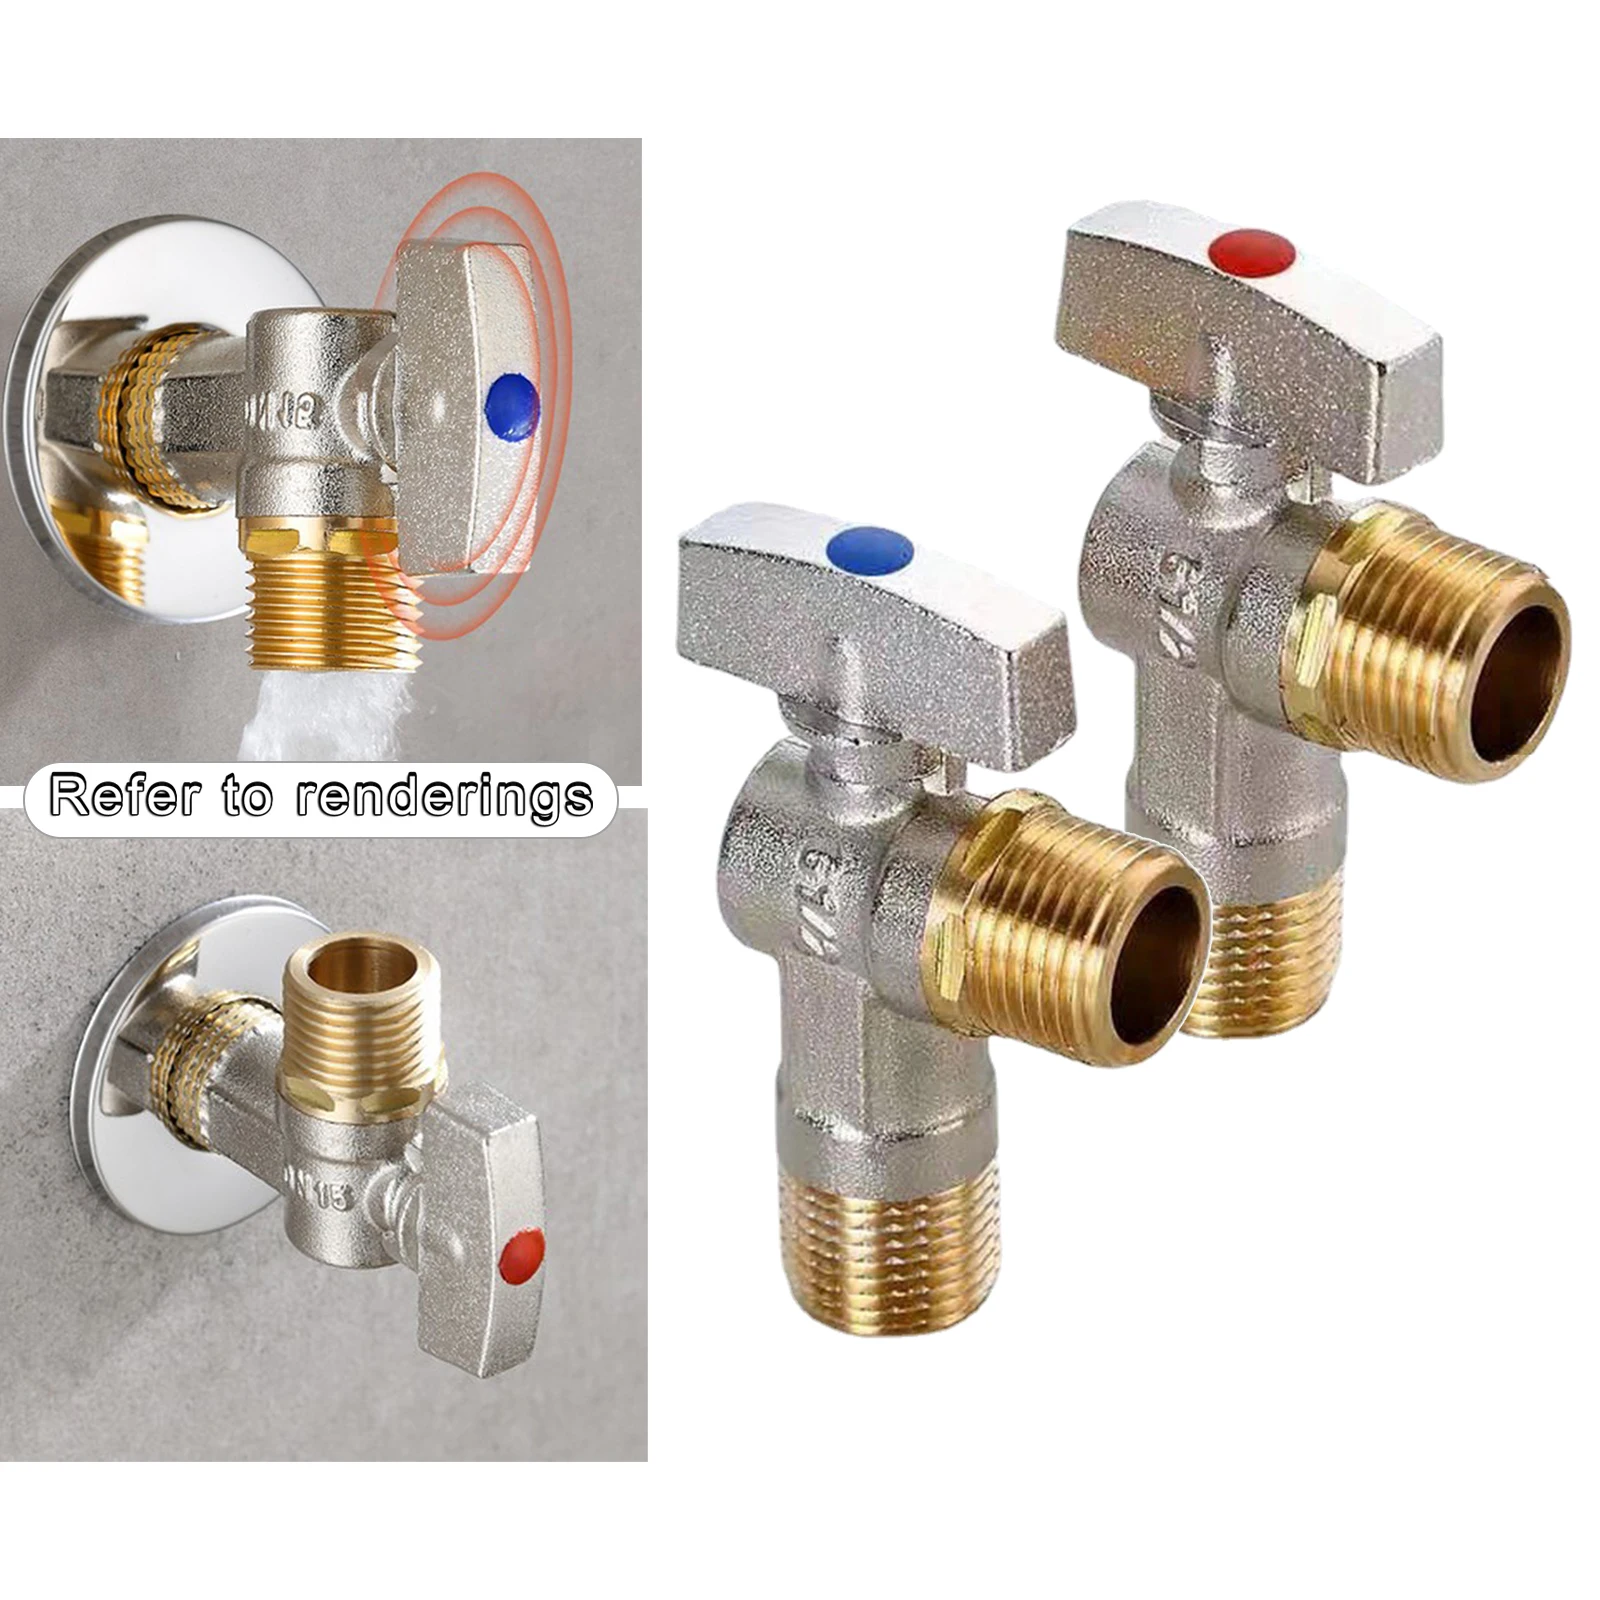 Brass Flow Angle Value Plumbing Fitting Triangle Valve Water Valve Angle Stop Valve for Faucet Bathroom Toilet Sink